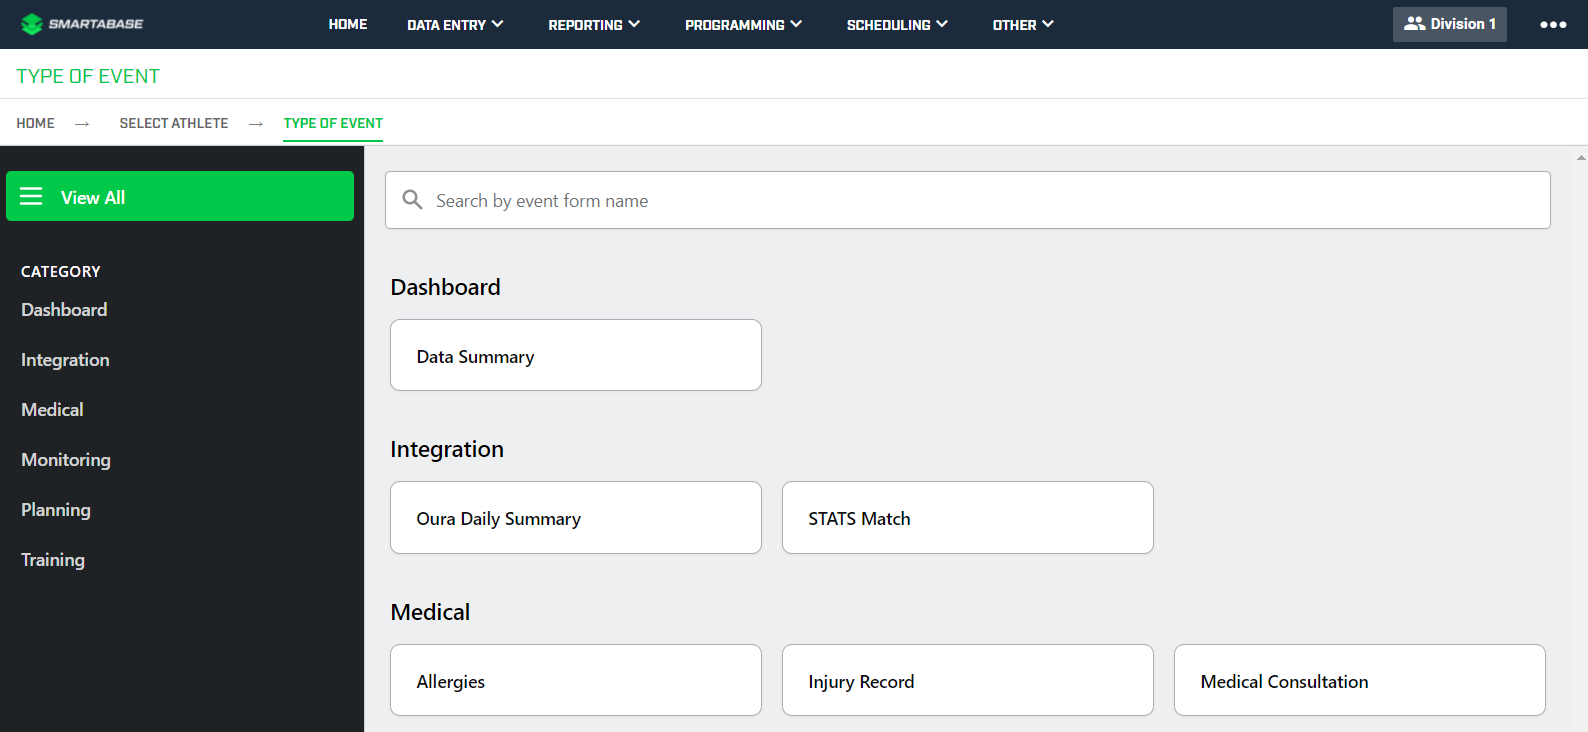 	A screenshot of the event form selection page on Smartabase Online when entering data for an individual or group.